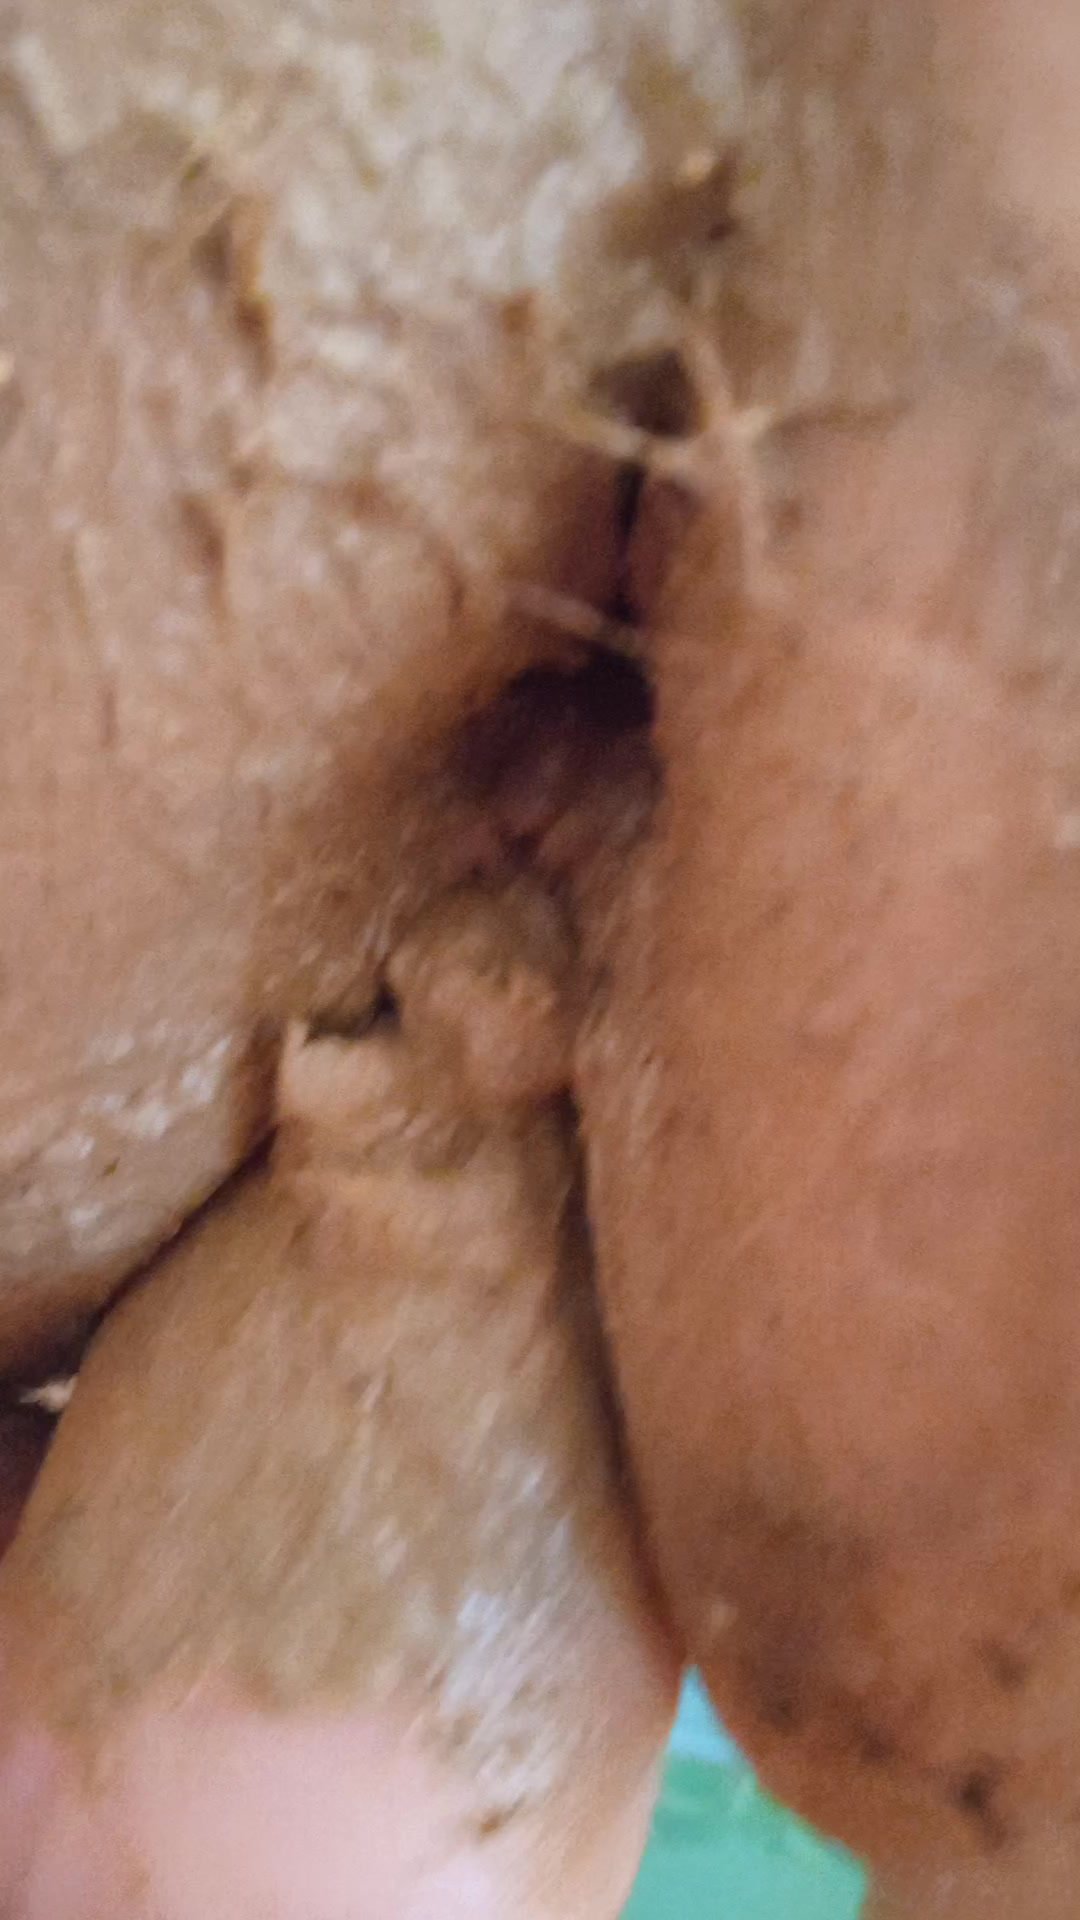 Stuffing shit into BBW's cunt and ass